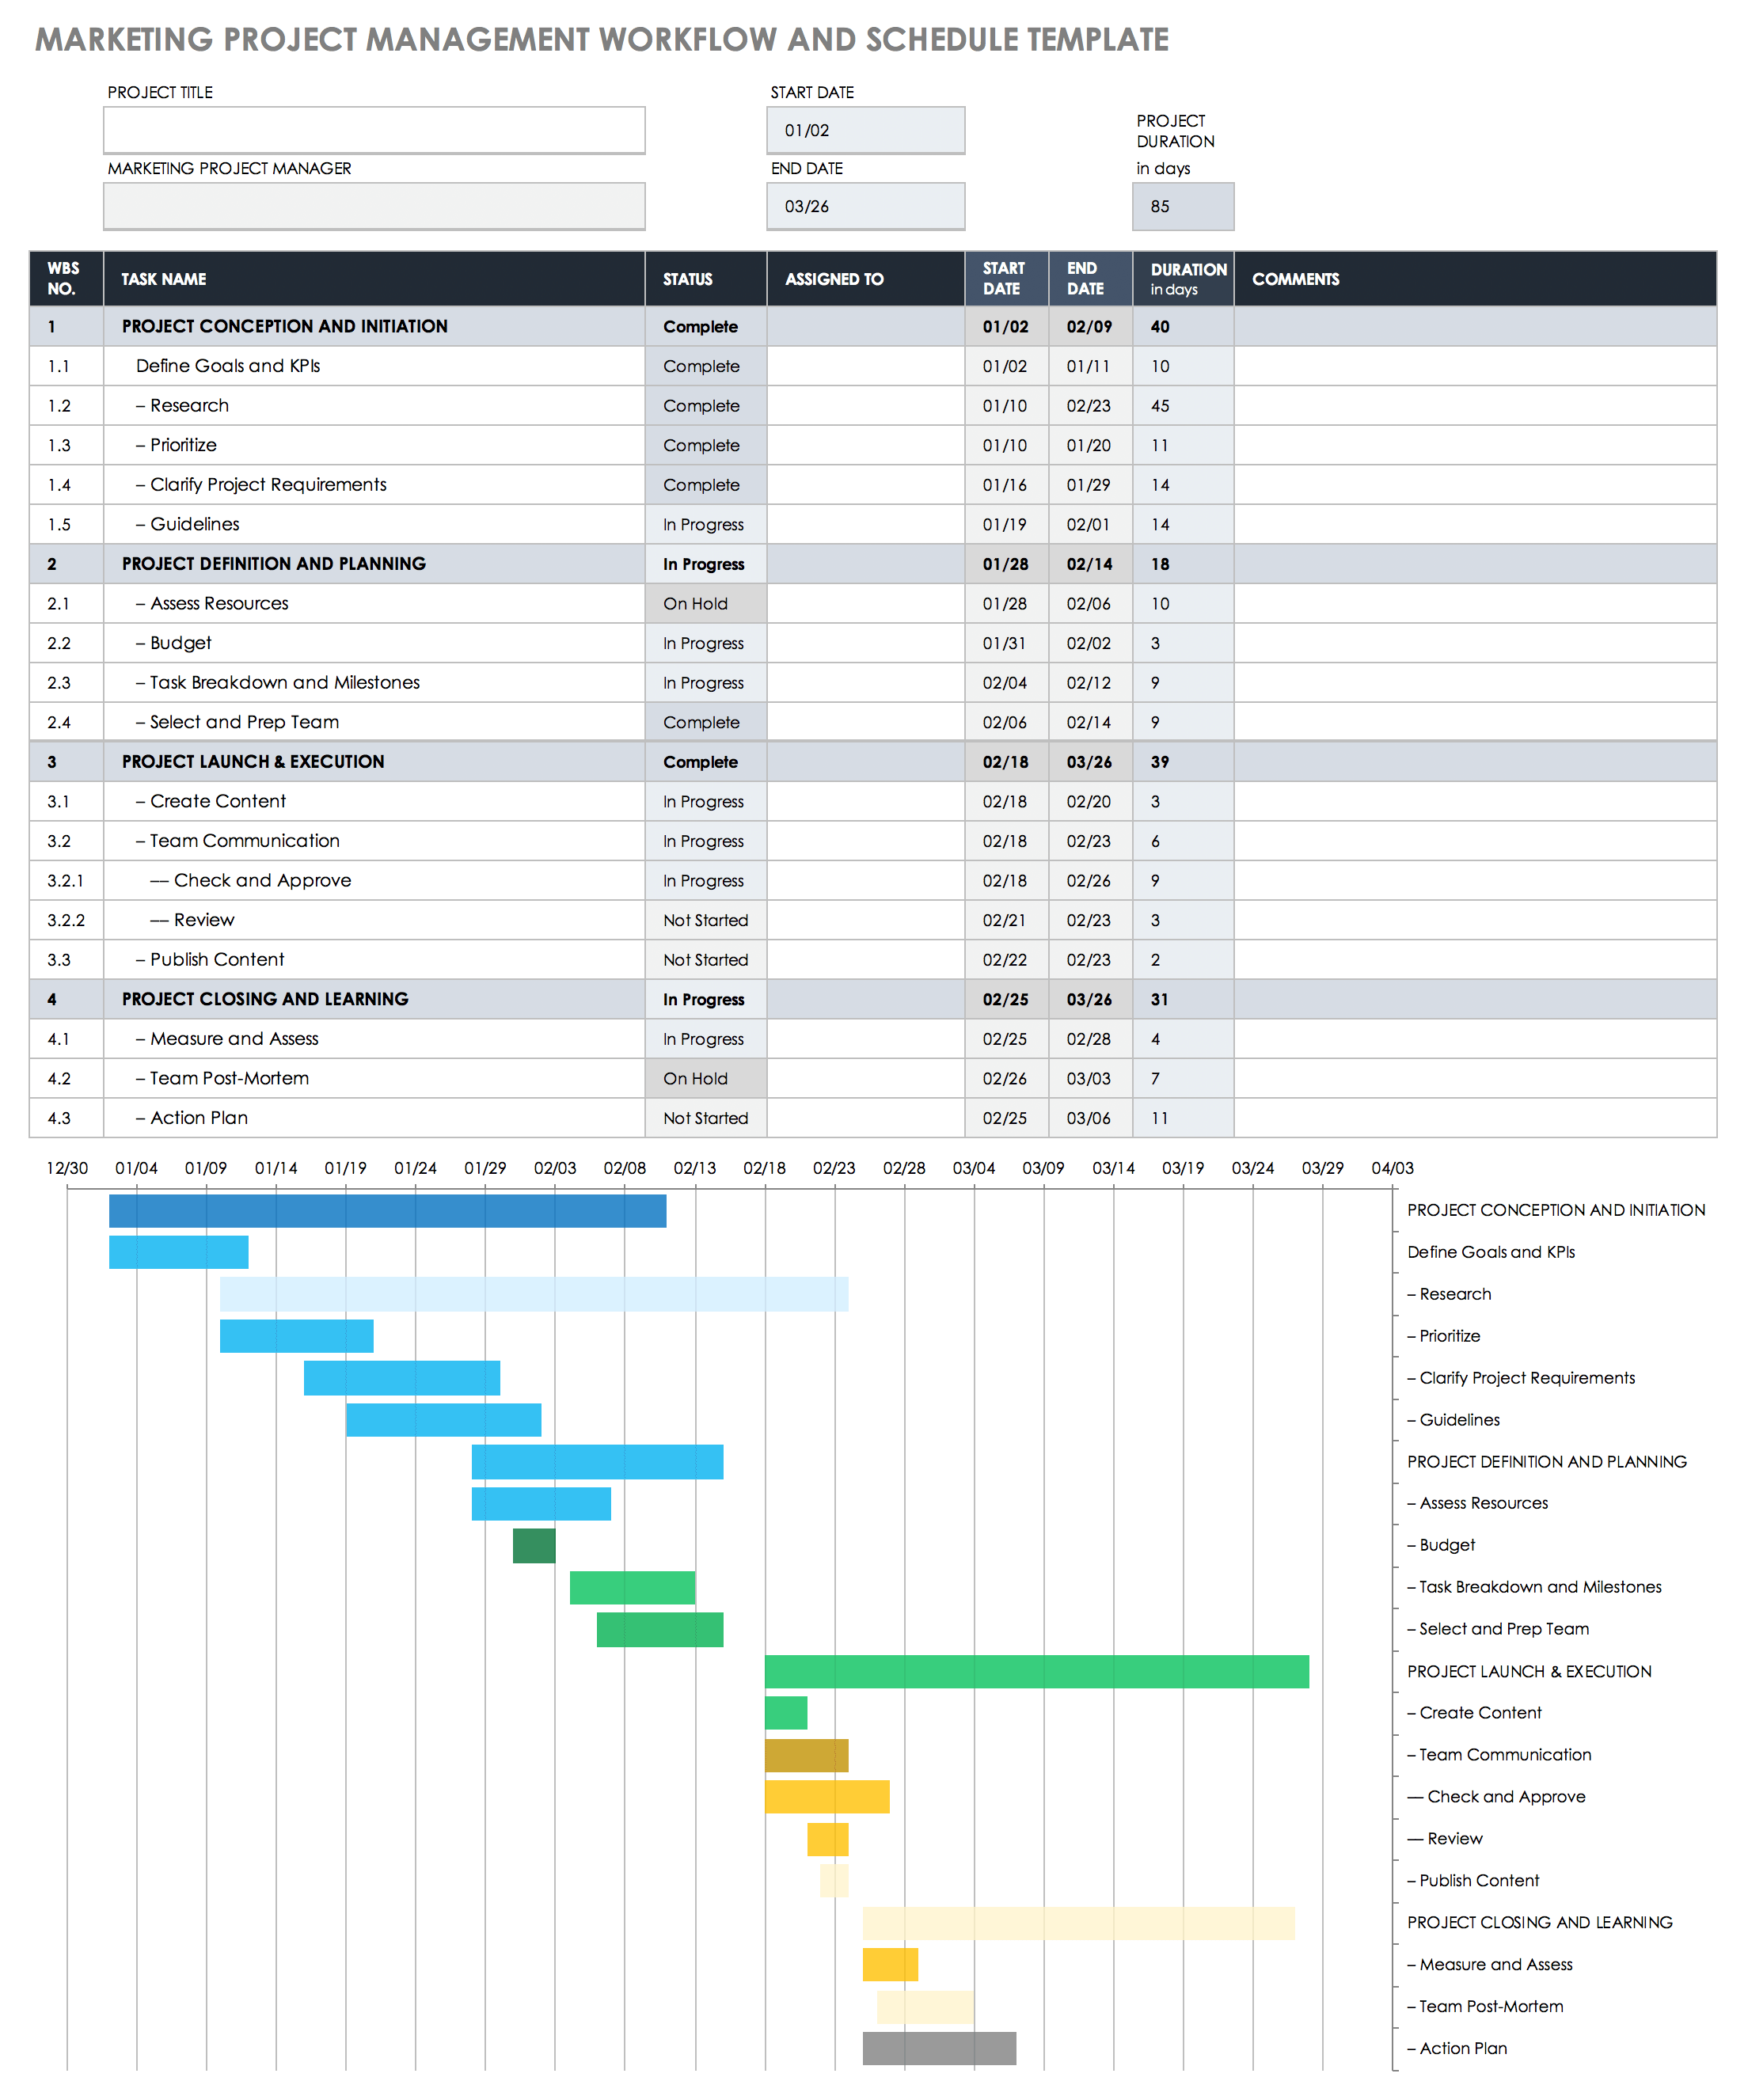 Marketing Project Management Workflow and Schedule Template